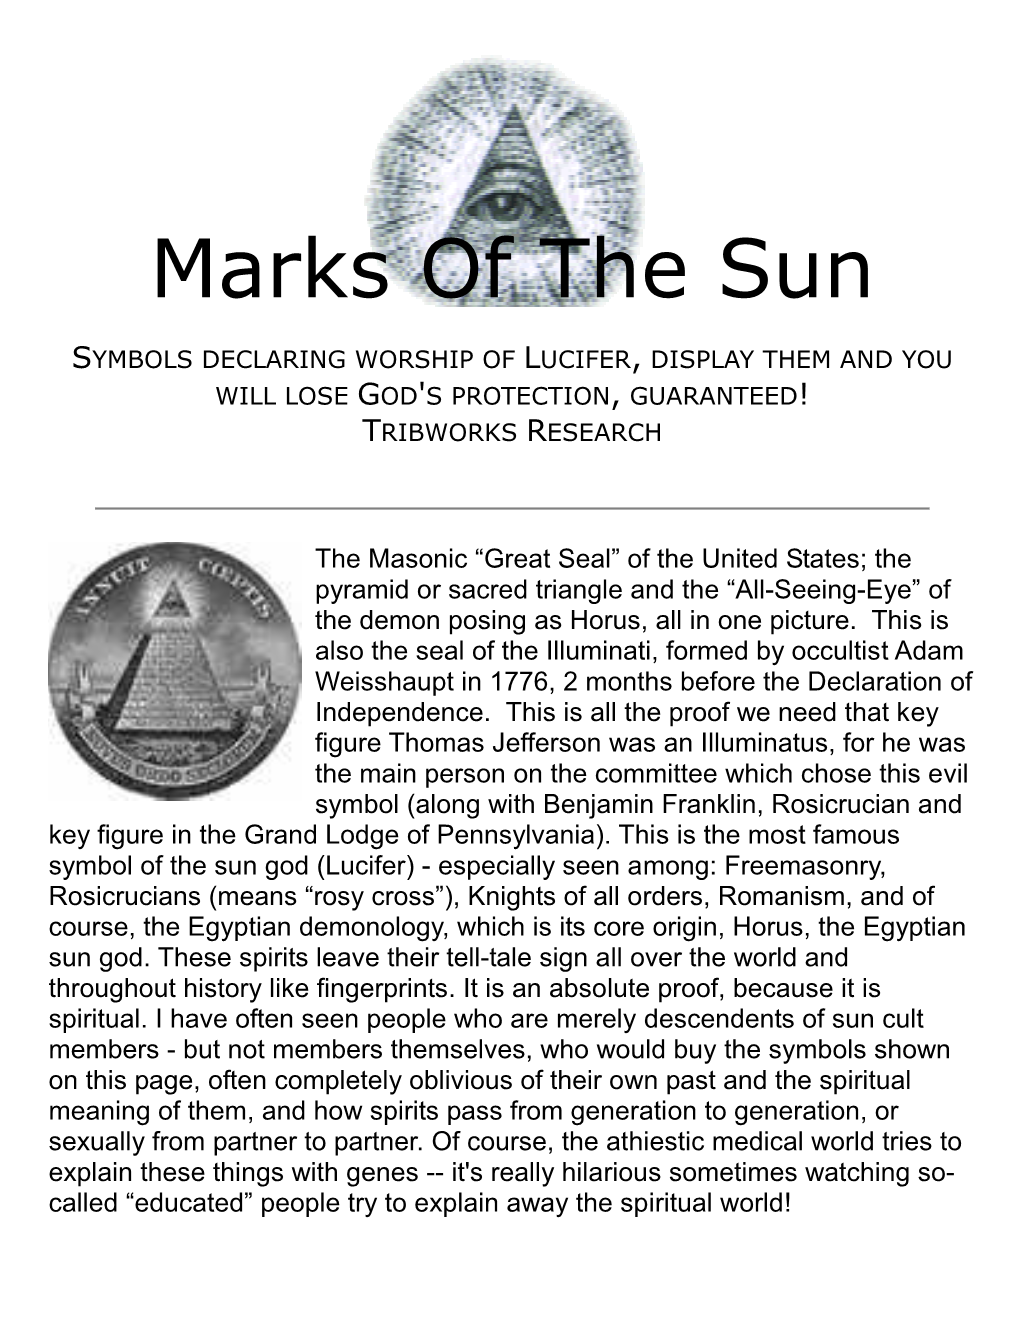 Marks of the Sun